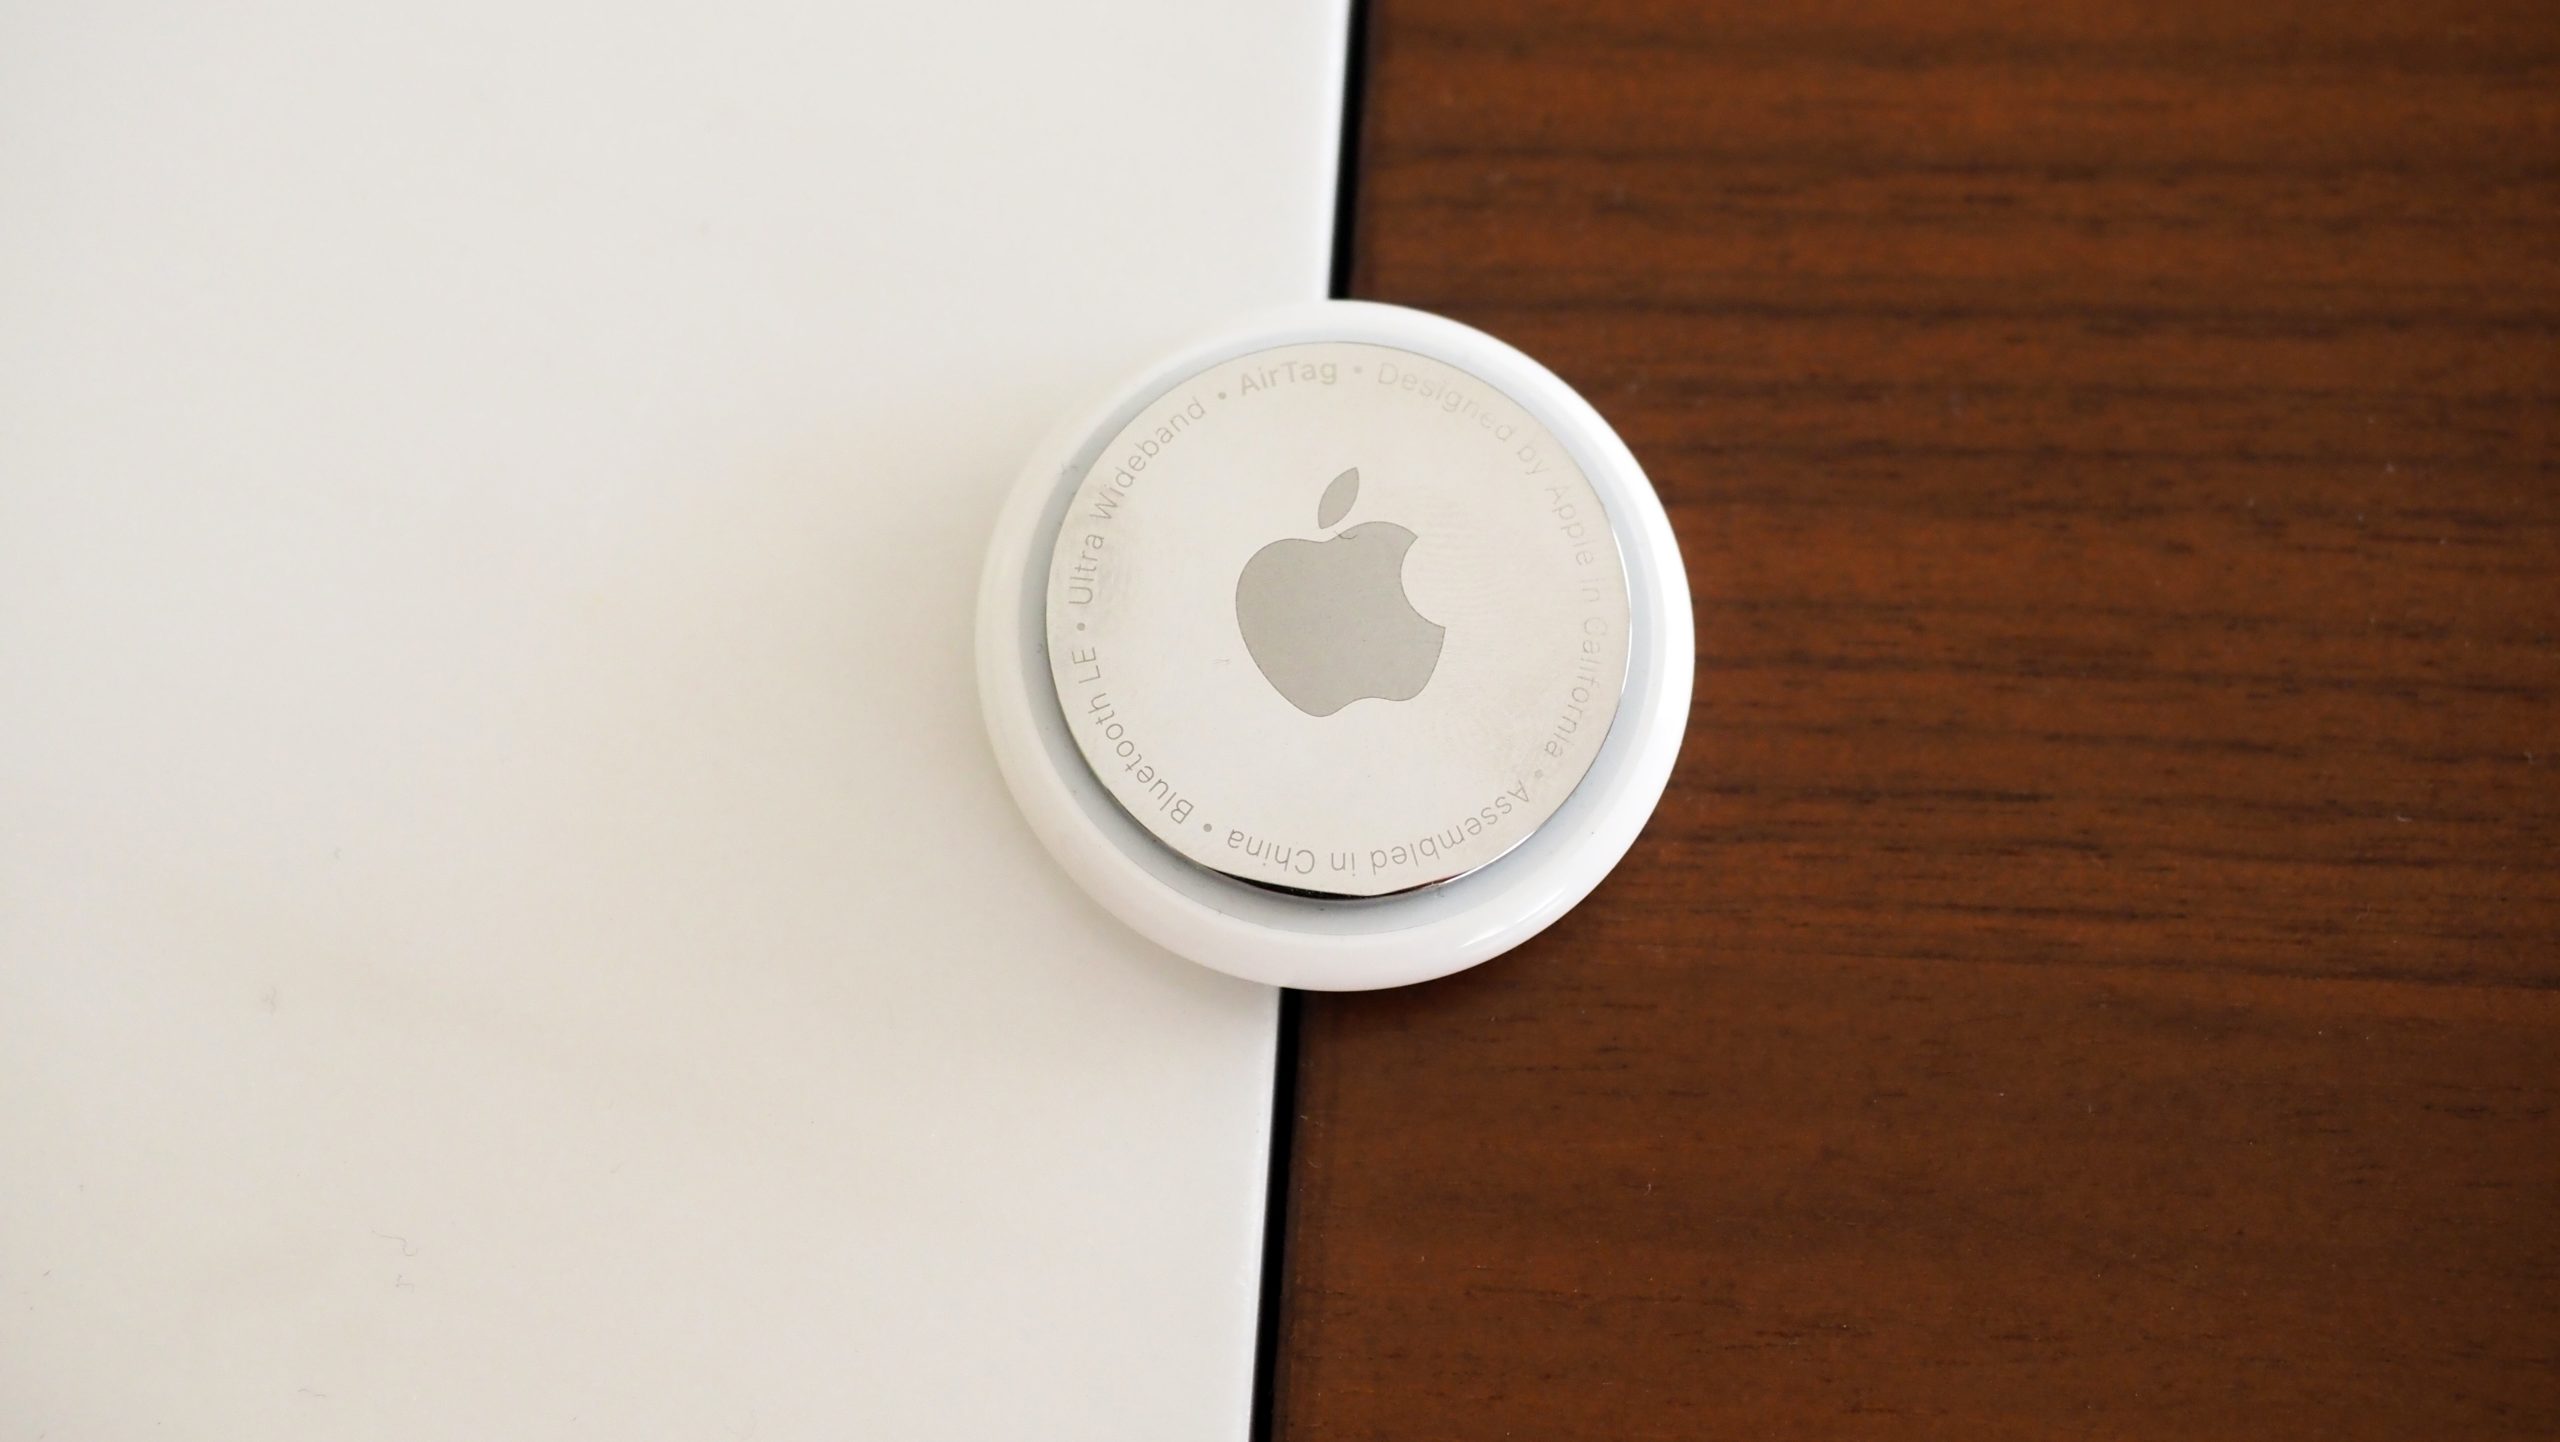 An Apple device that lets you swap out the battery?! What a blessing. (Photo: Caitlin McGarry/Gizmodo)